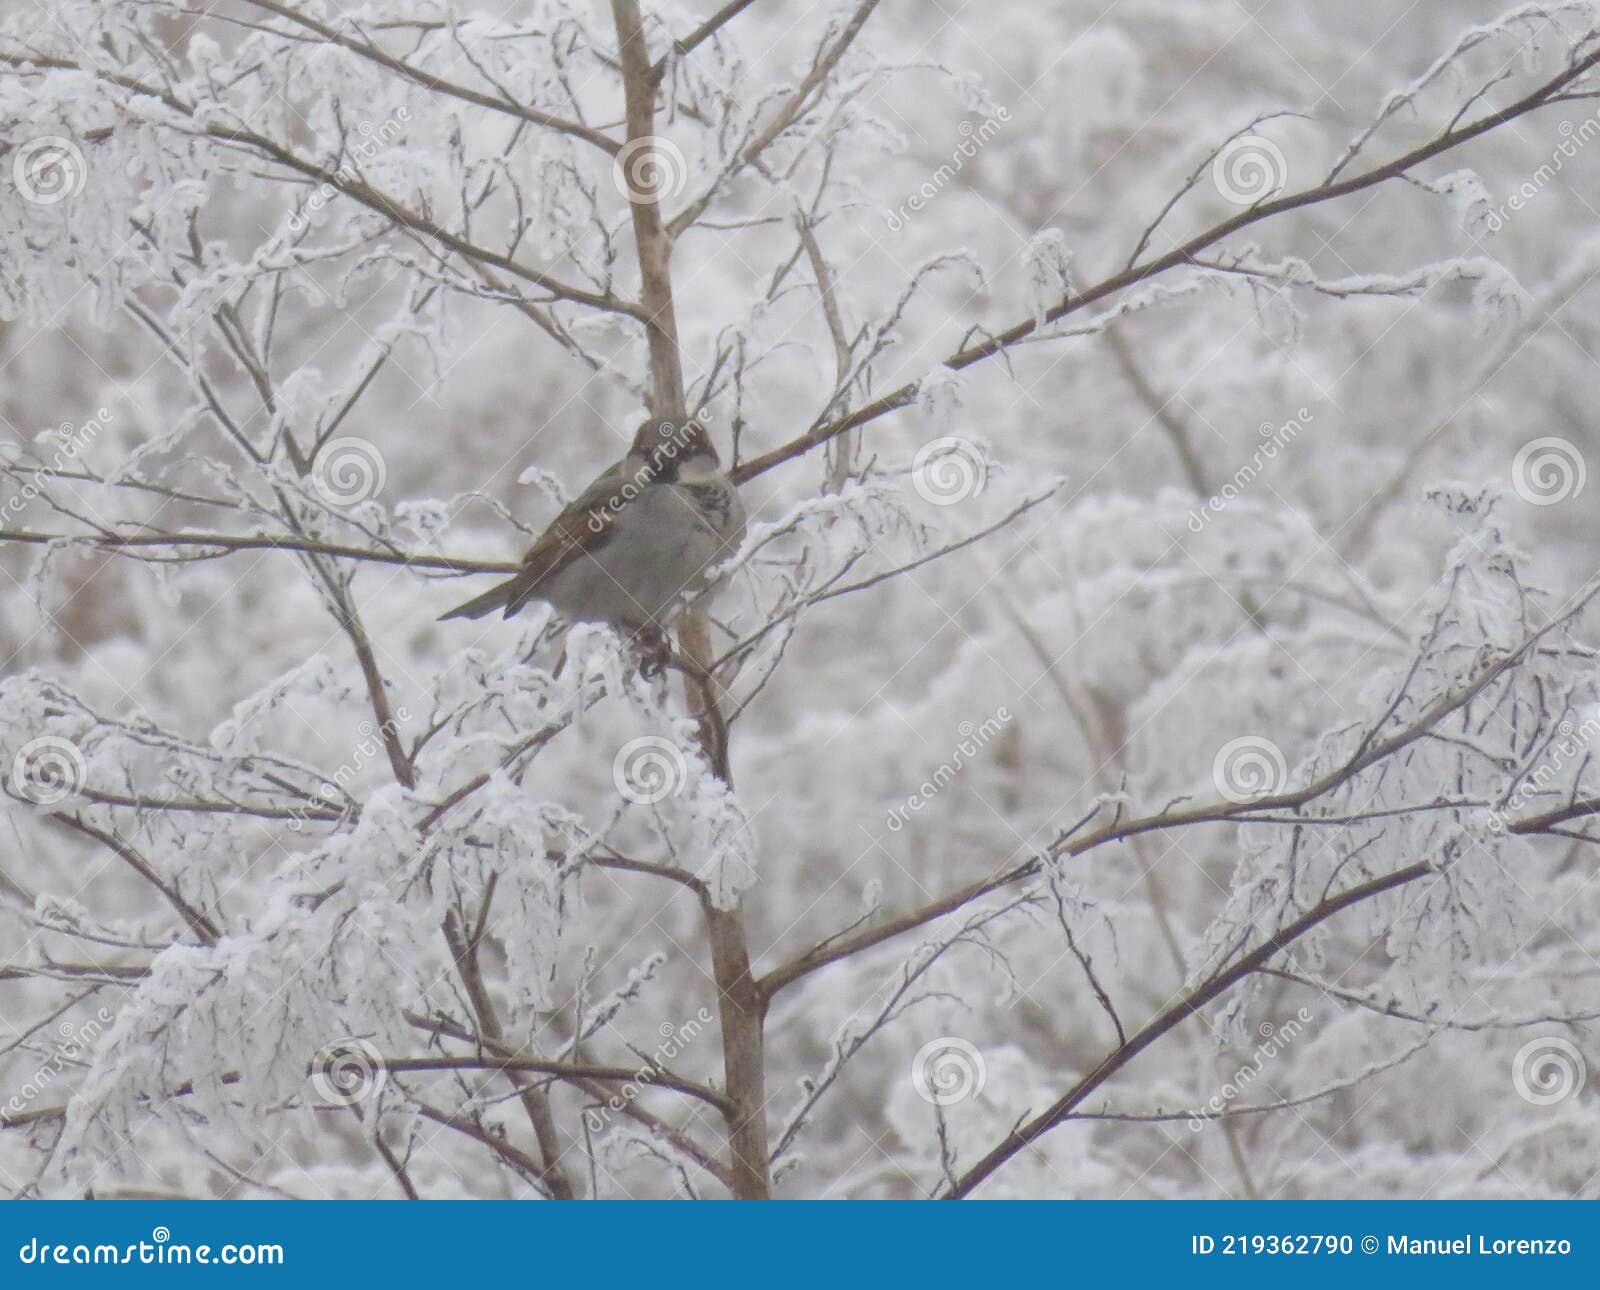 beautiful birds on a frozen branch passing cold looking for food